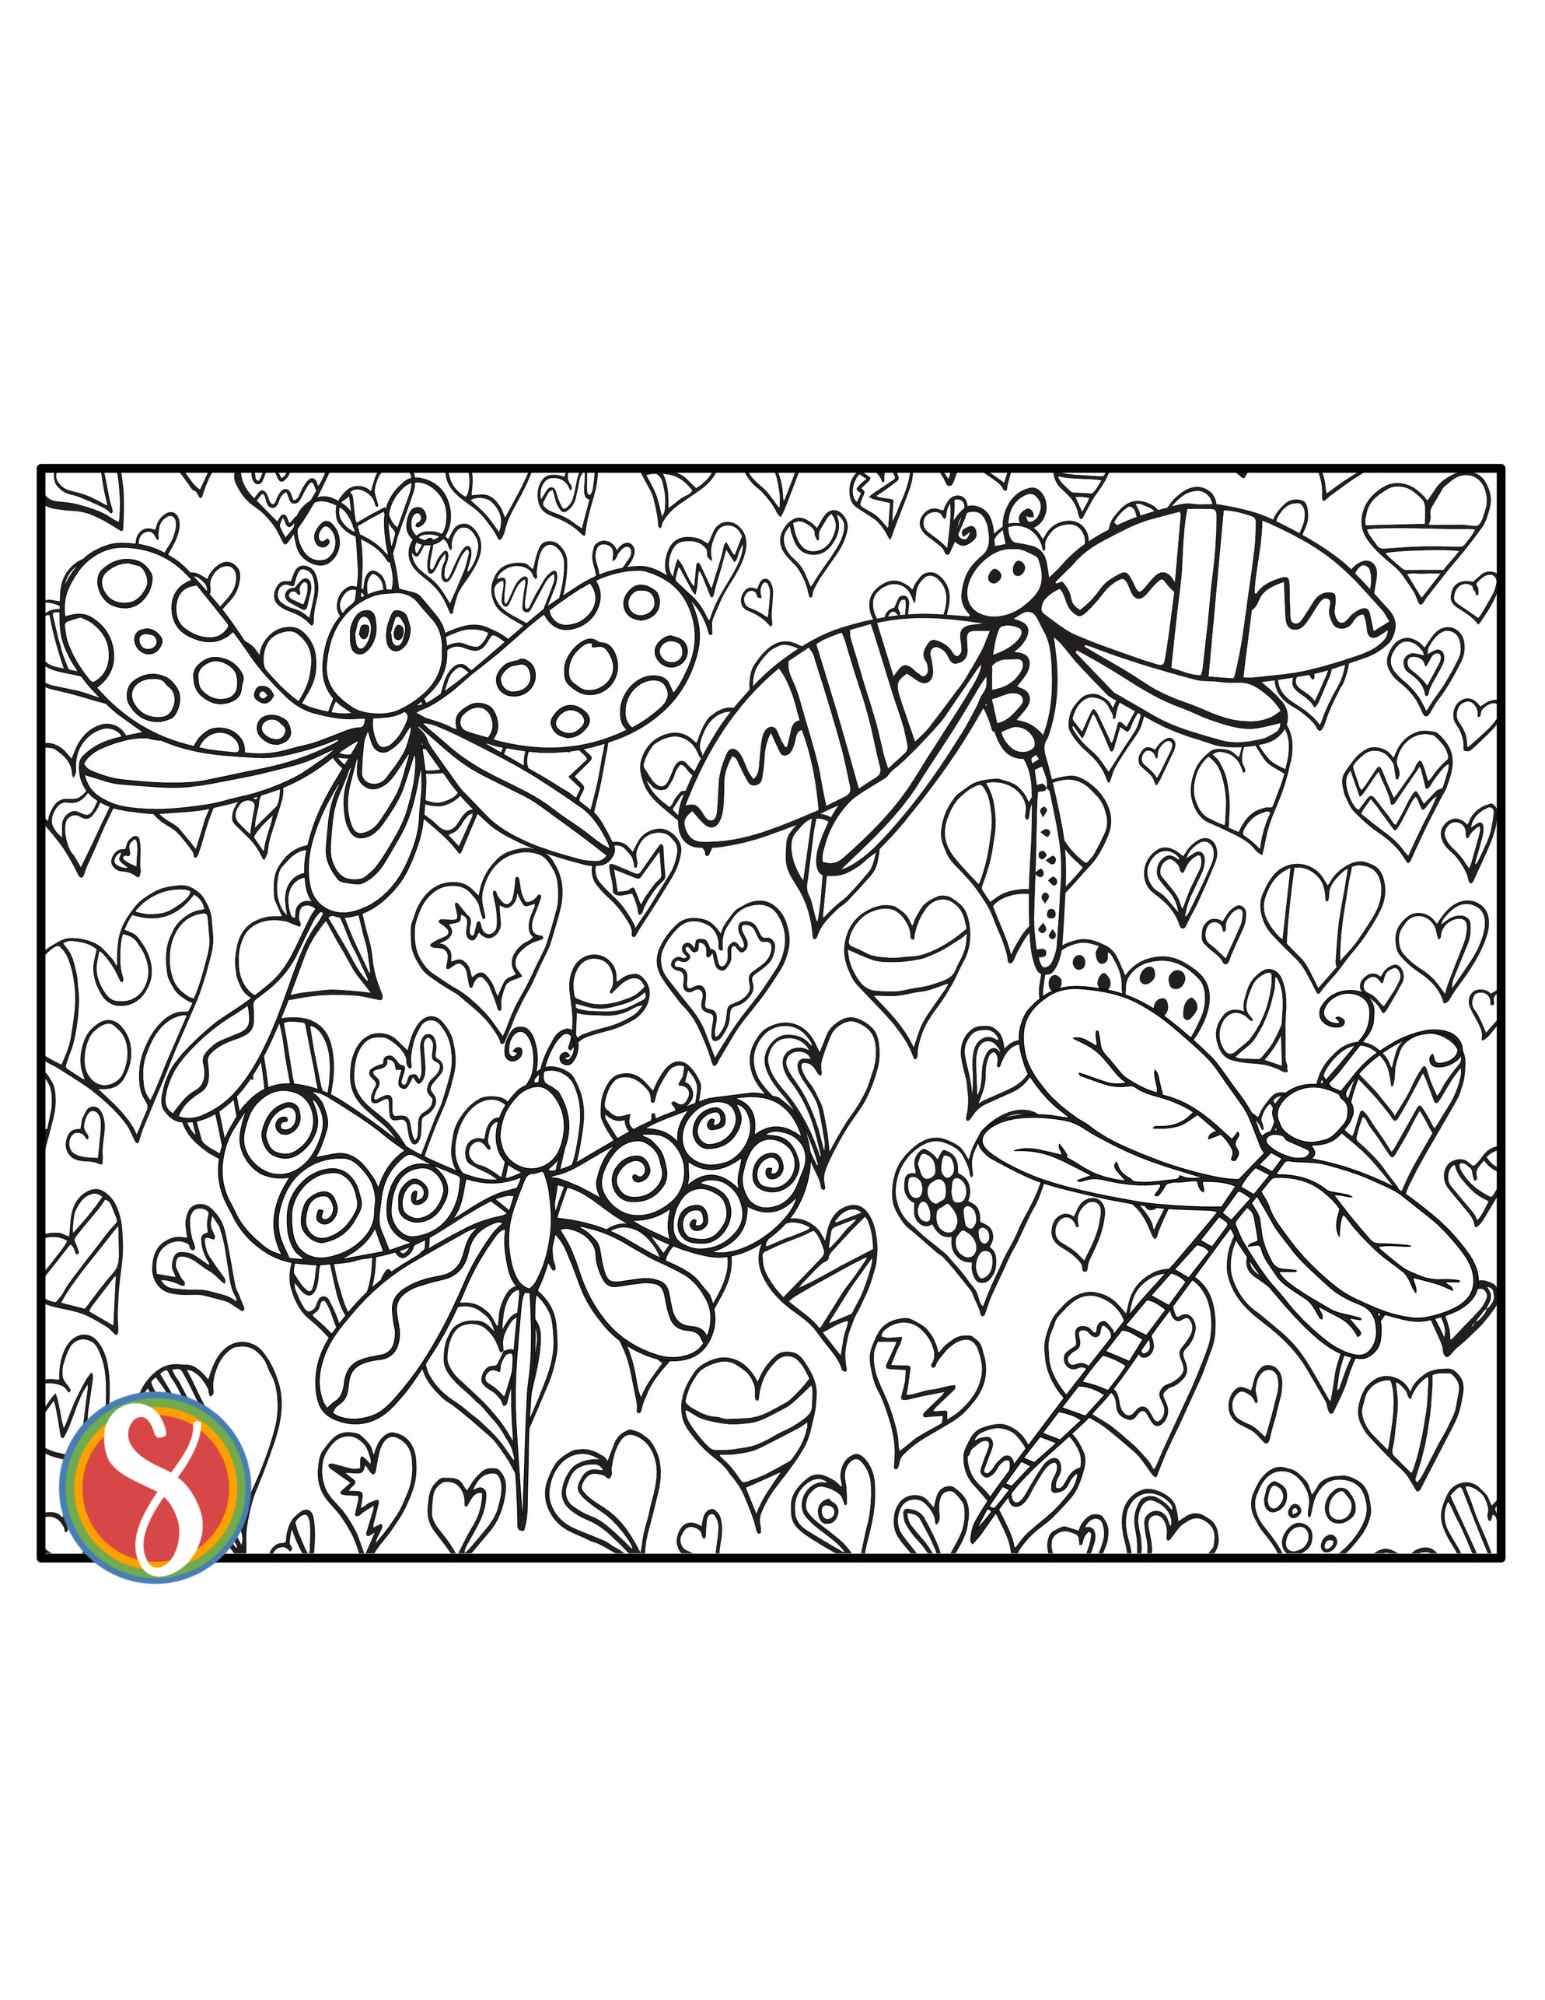 4 dragonflies with doodles on this dragonfly coloring page with heart background